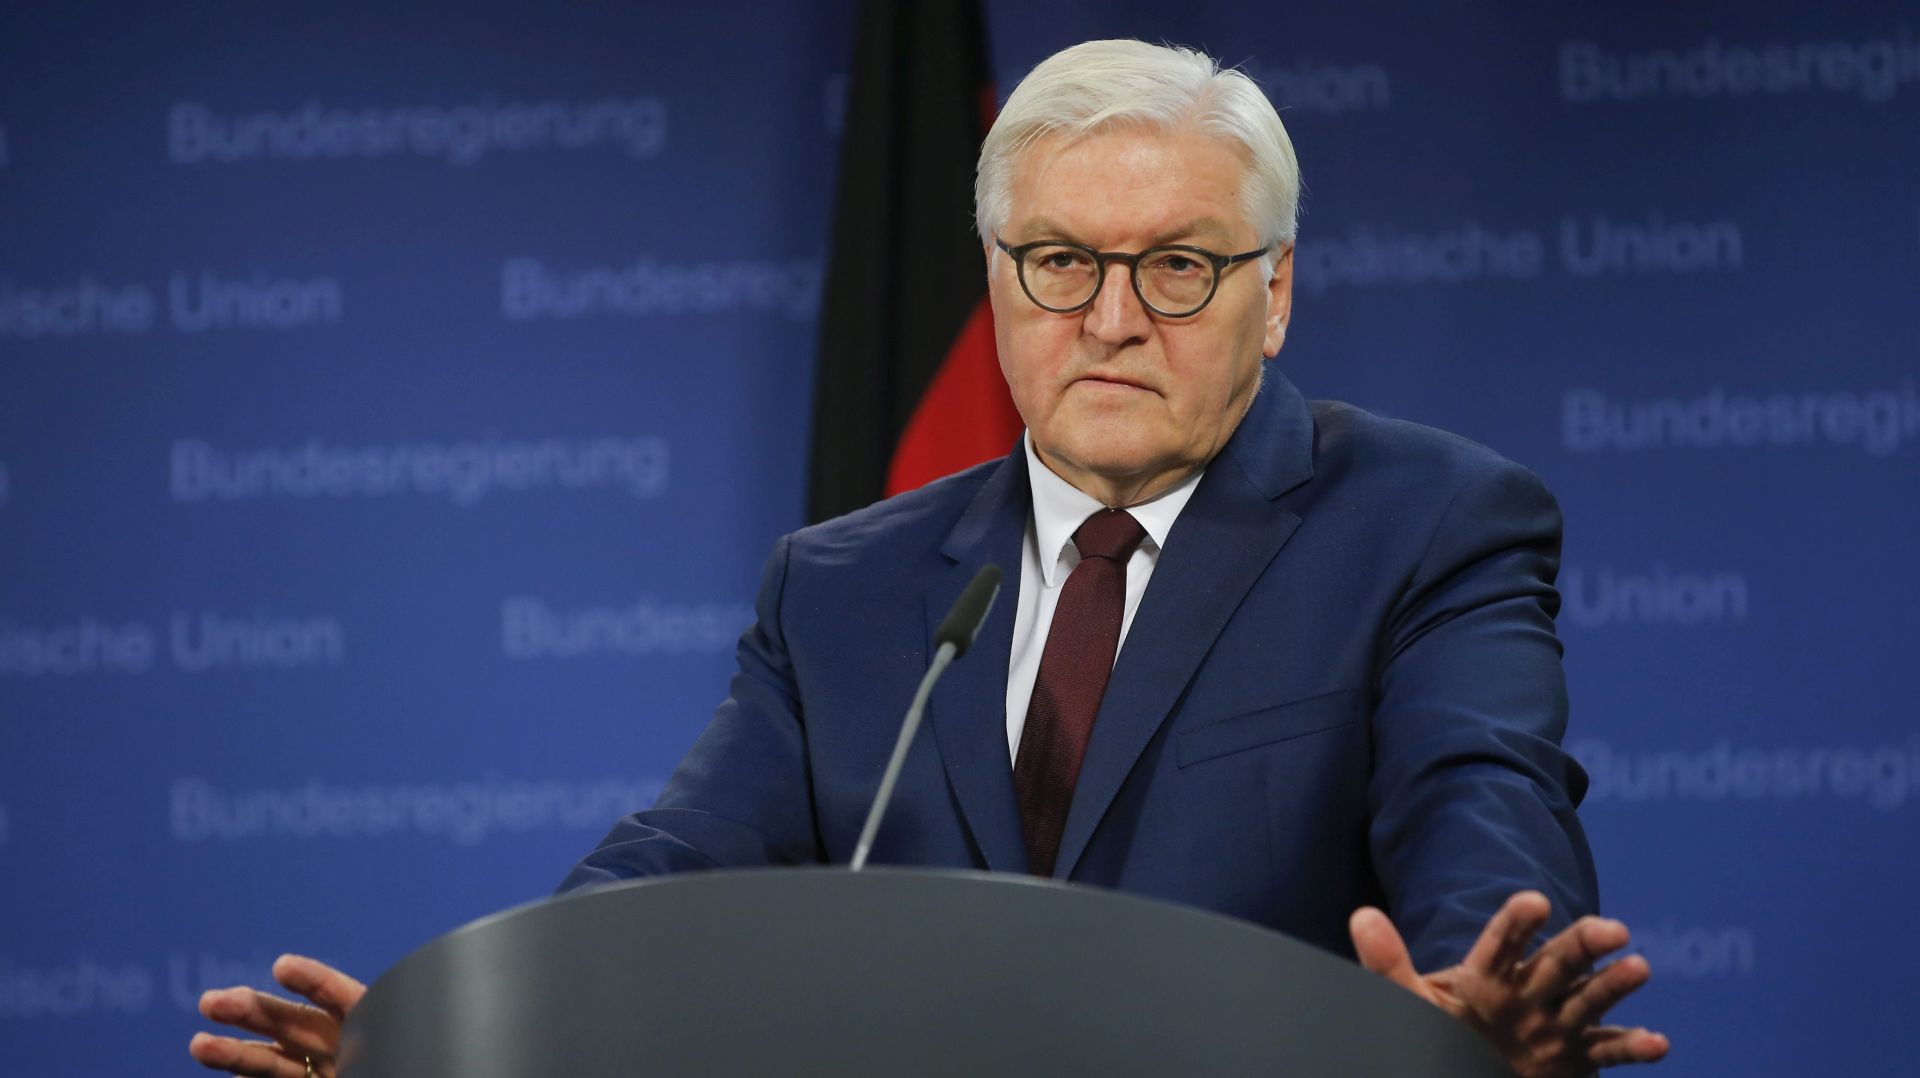 epa05672583 German Foreign Minister Frank-Walter Steinmeier gives a press briefing during an EU foreign affairs council in Brussels, Belgium, 12 December 2016.  EPA/OLIVIER HOSLET